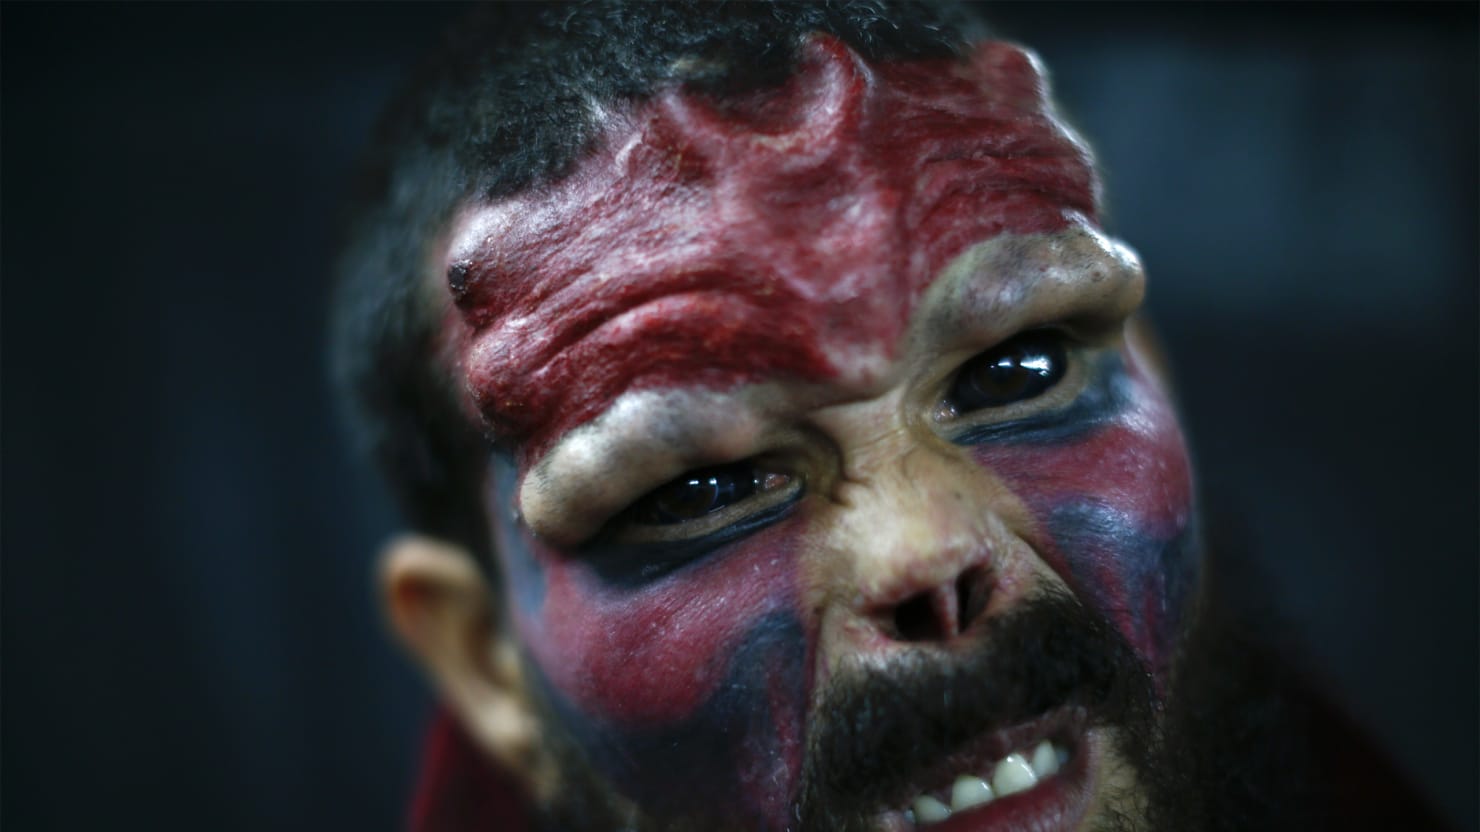 A Man Cut His Nose Off To Transform Into Marvel’s Captain America